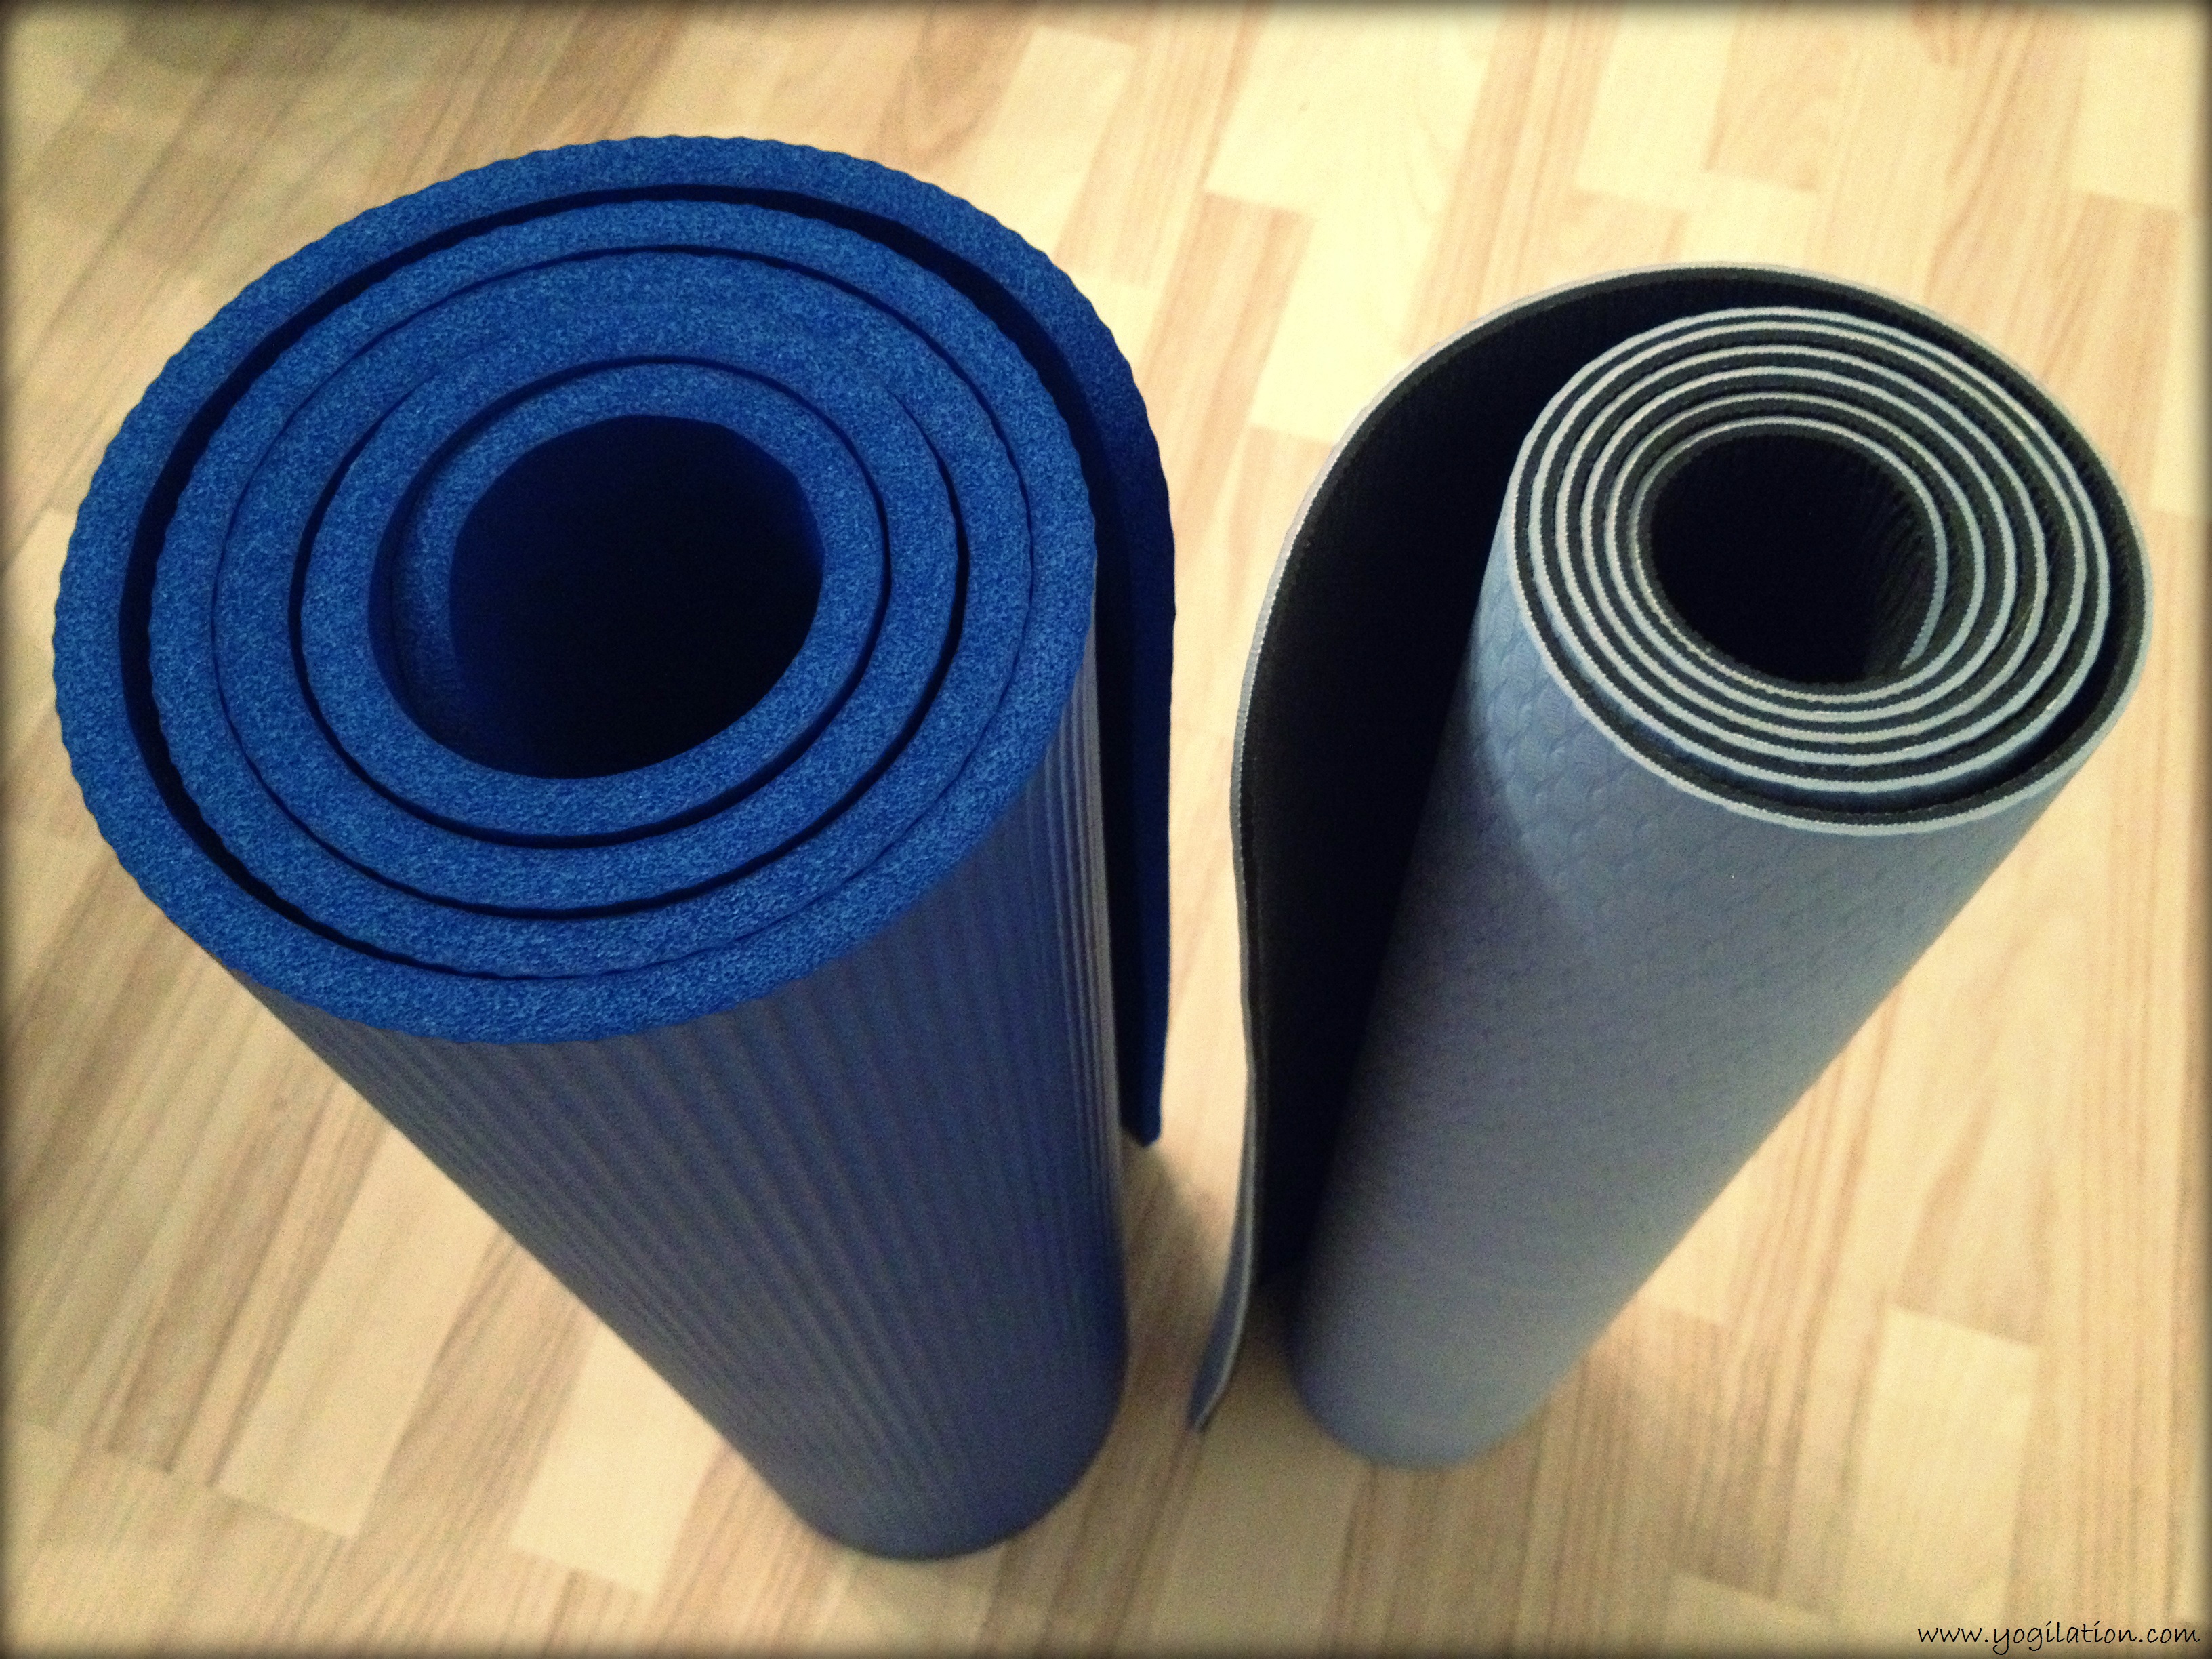 Exercise Mat vs Yoga Mat: Is There a Difference?